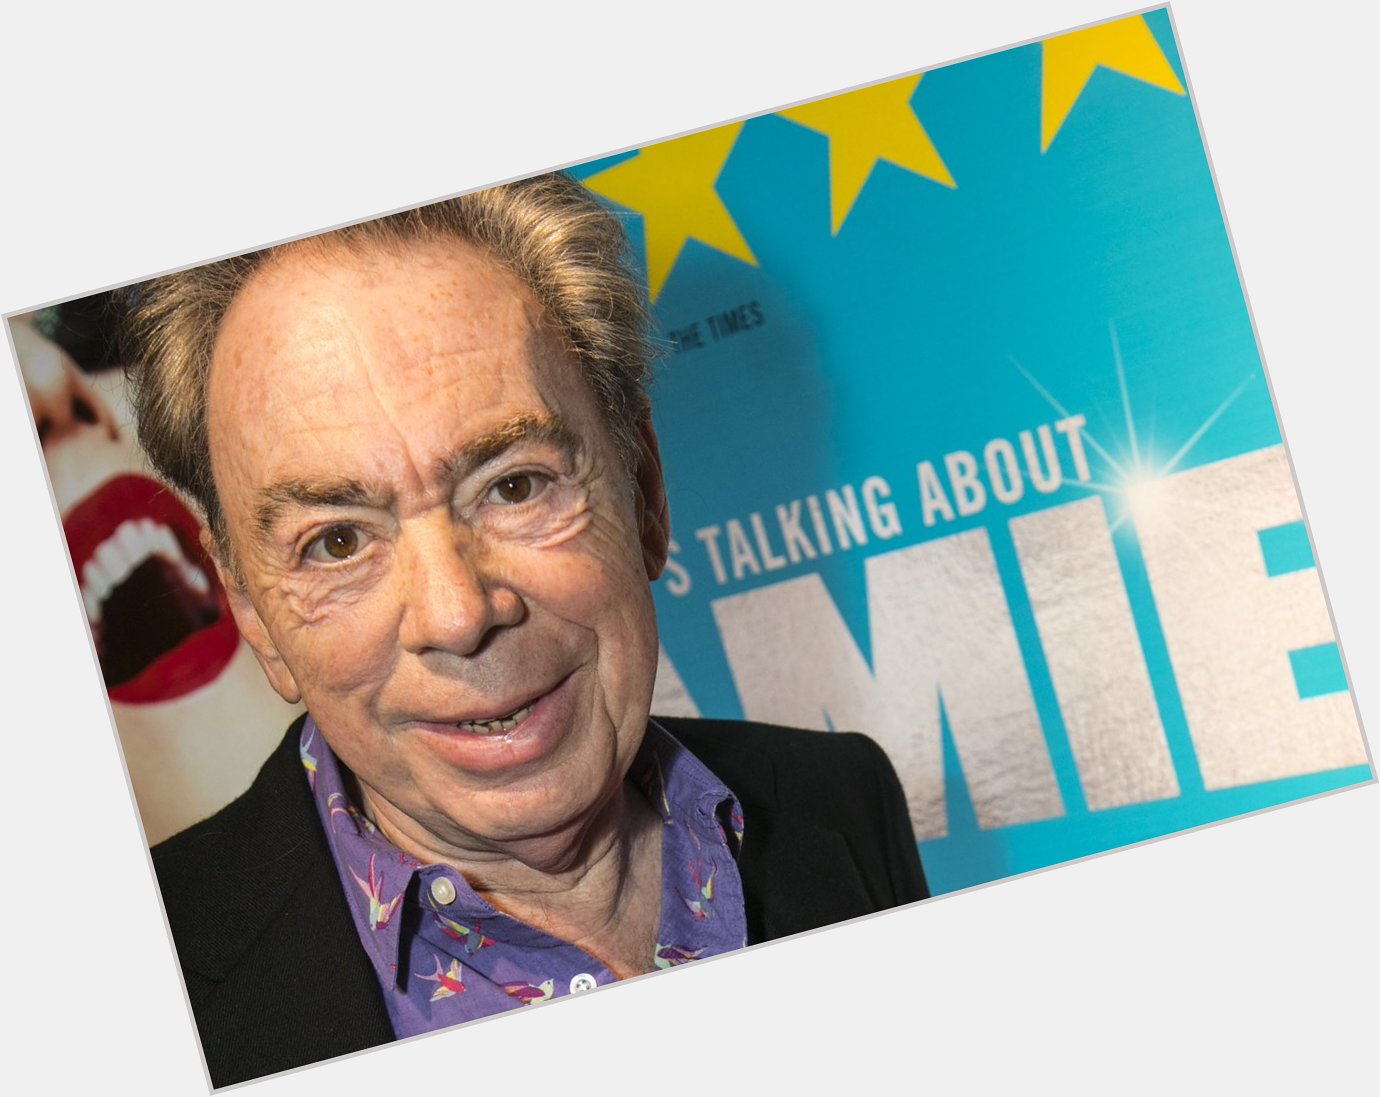 Happy 70th birthday to the legend that is Andrew Lloyd Webber. What s your favourite ALW show? 